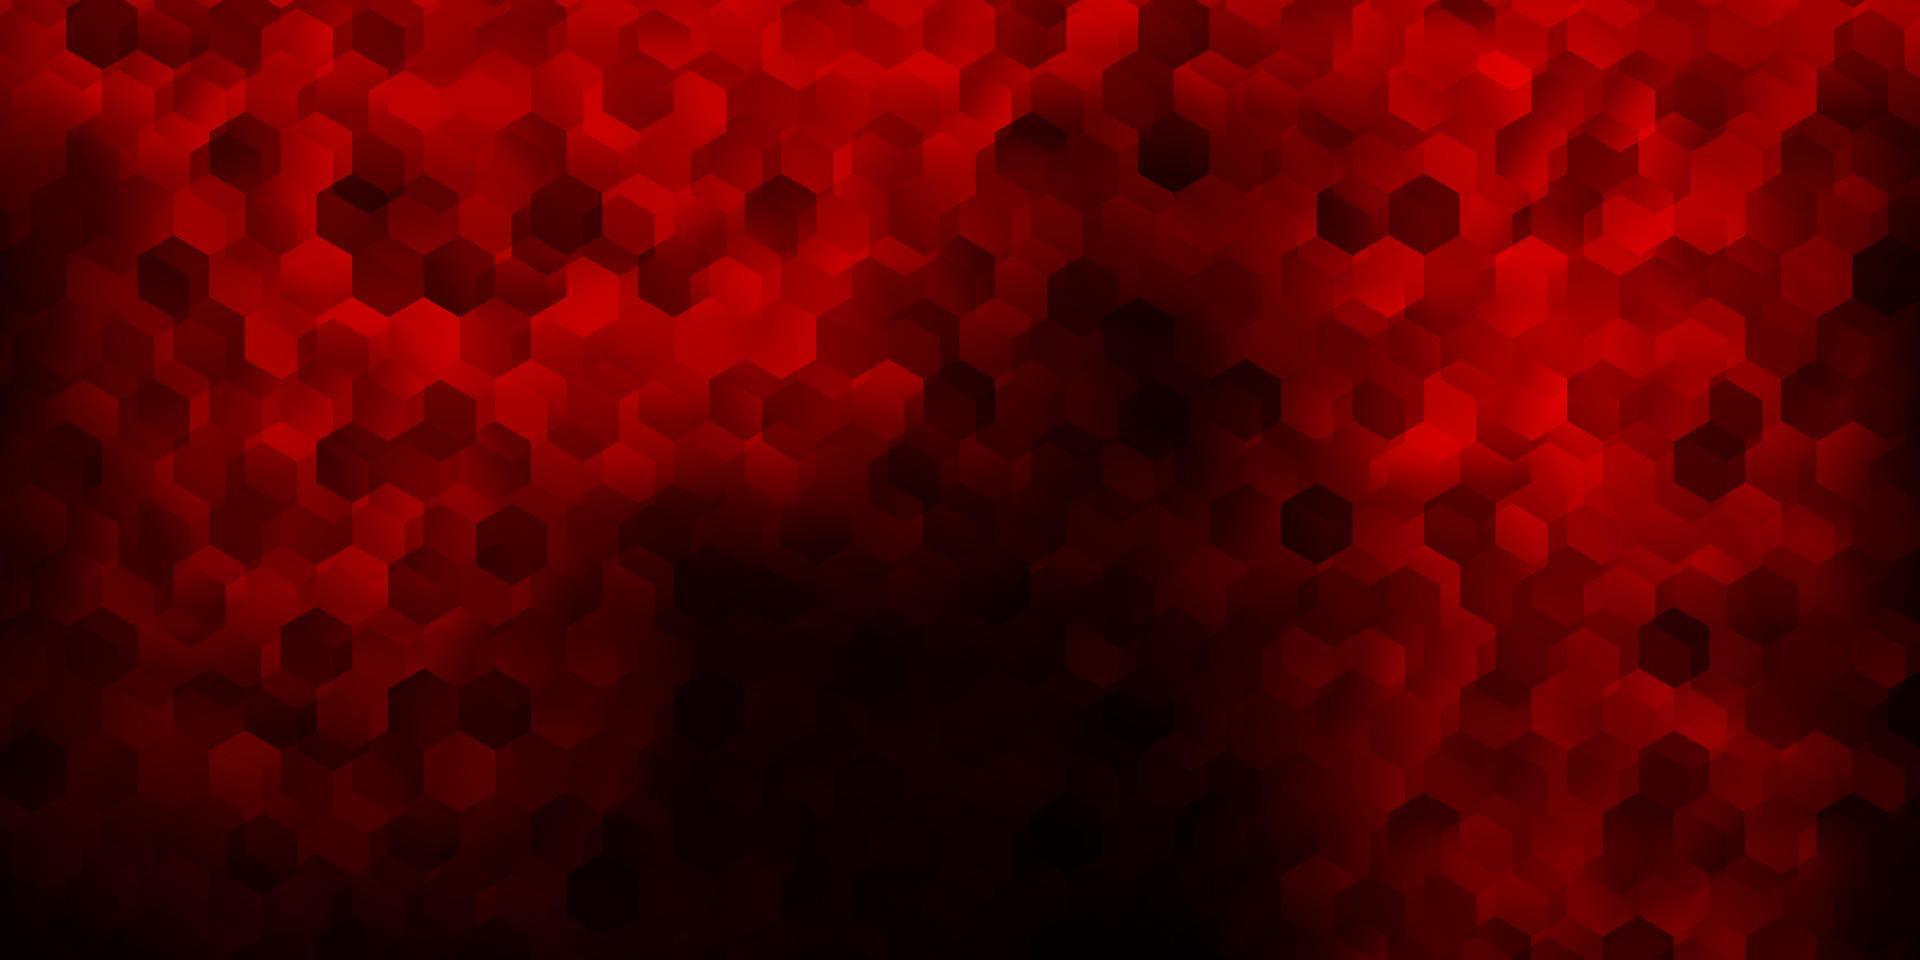 Dark red vector cover with simple hexagons.